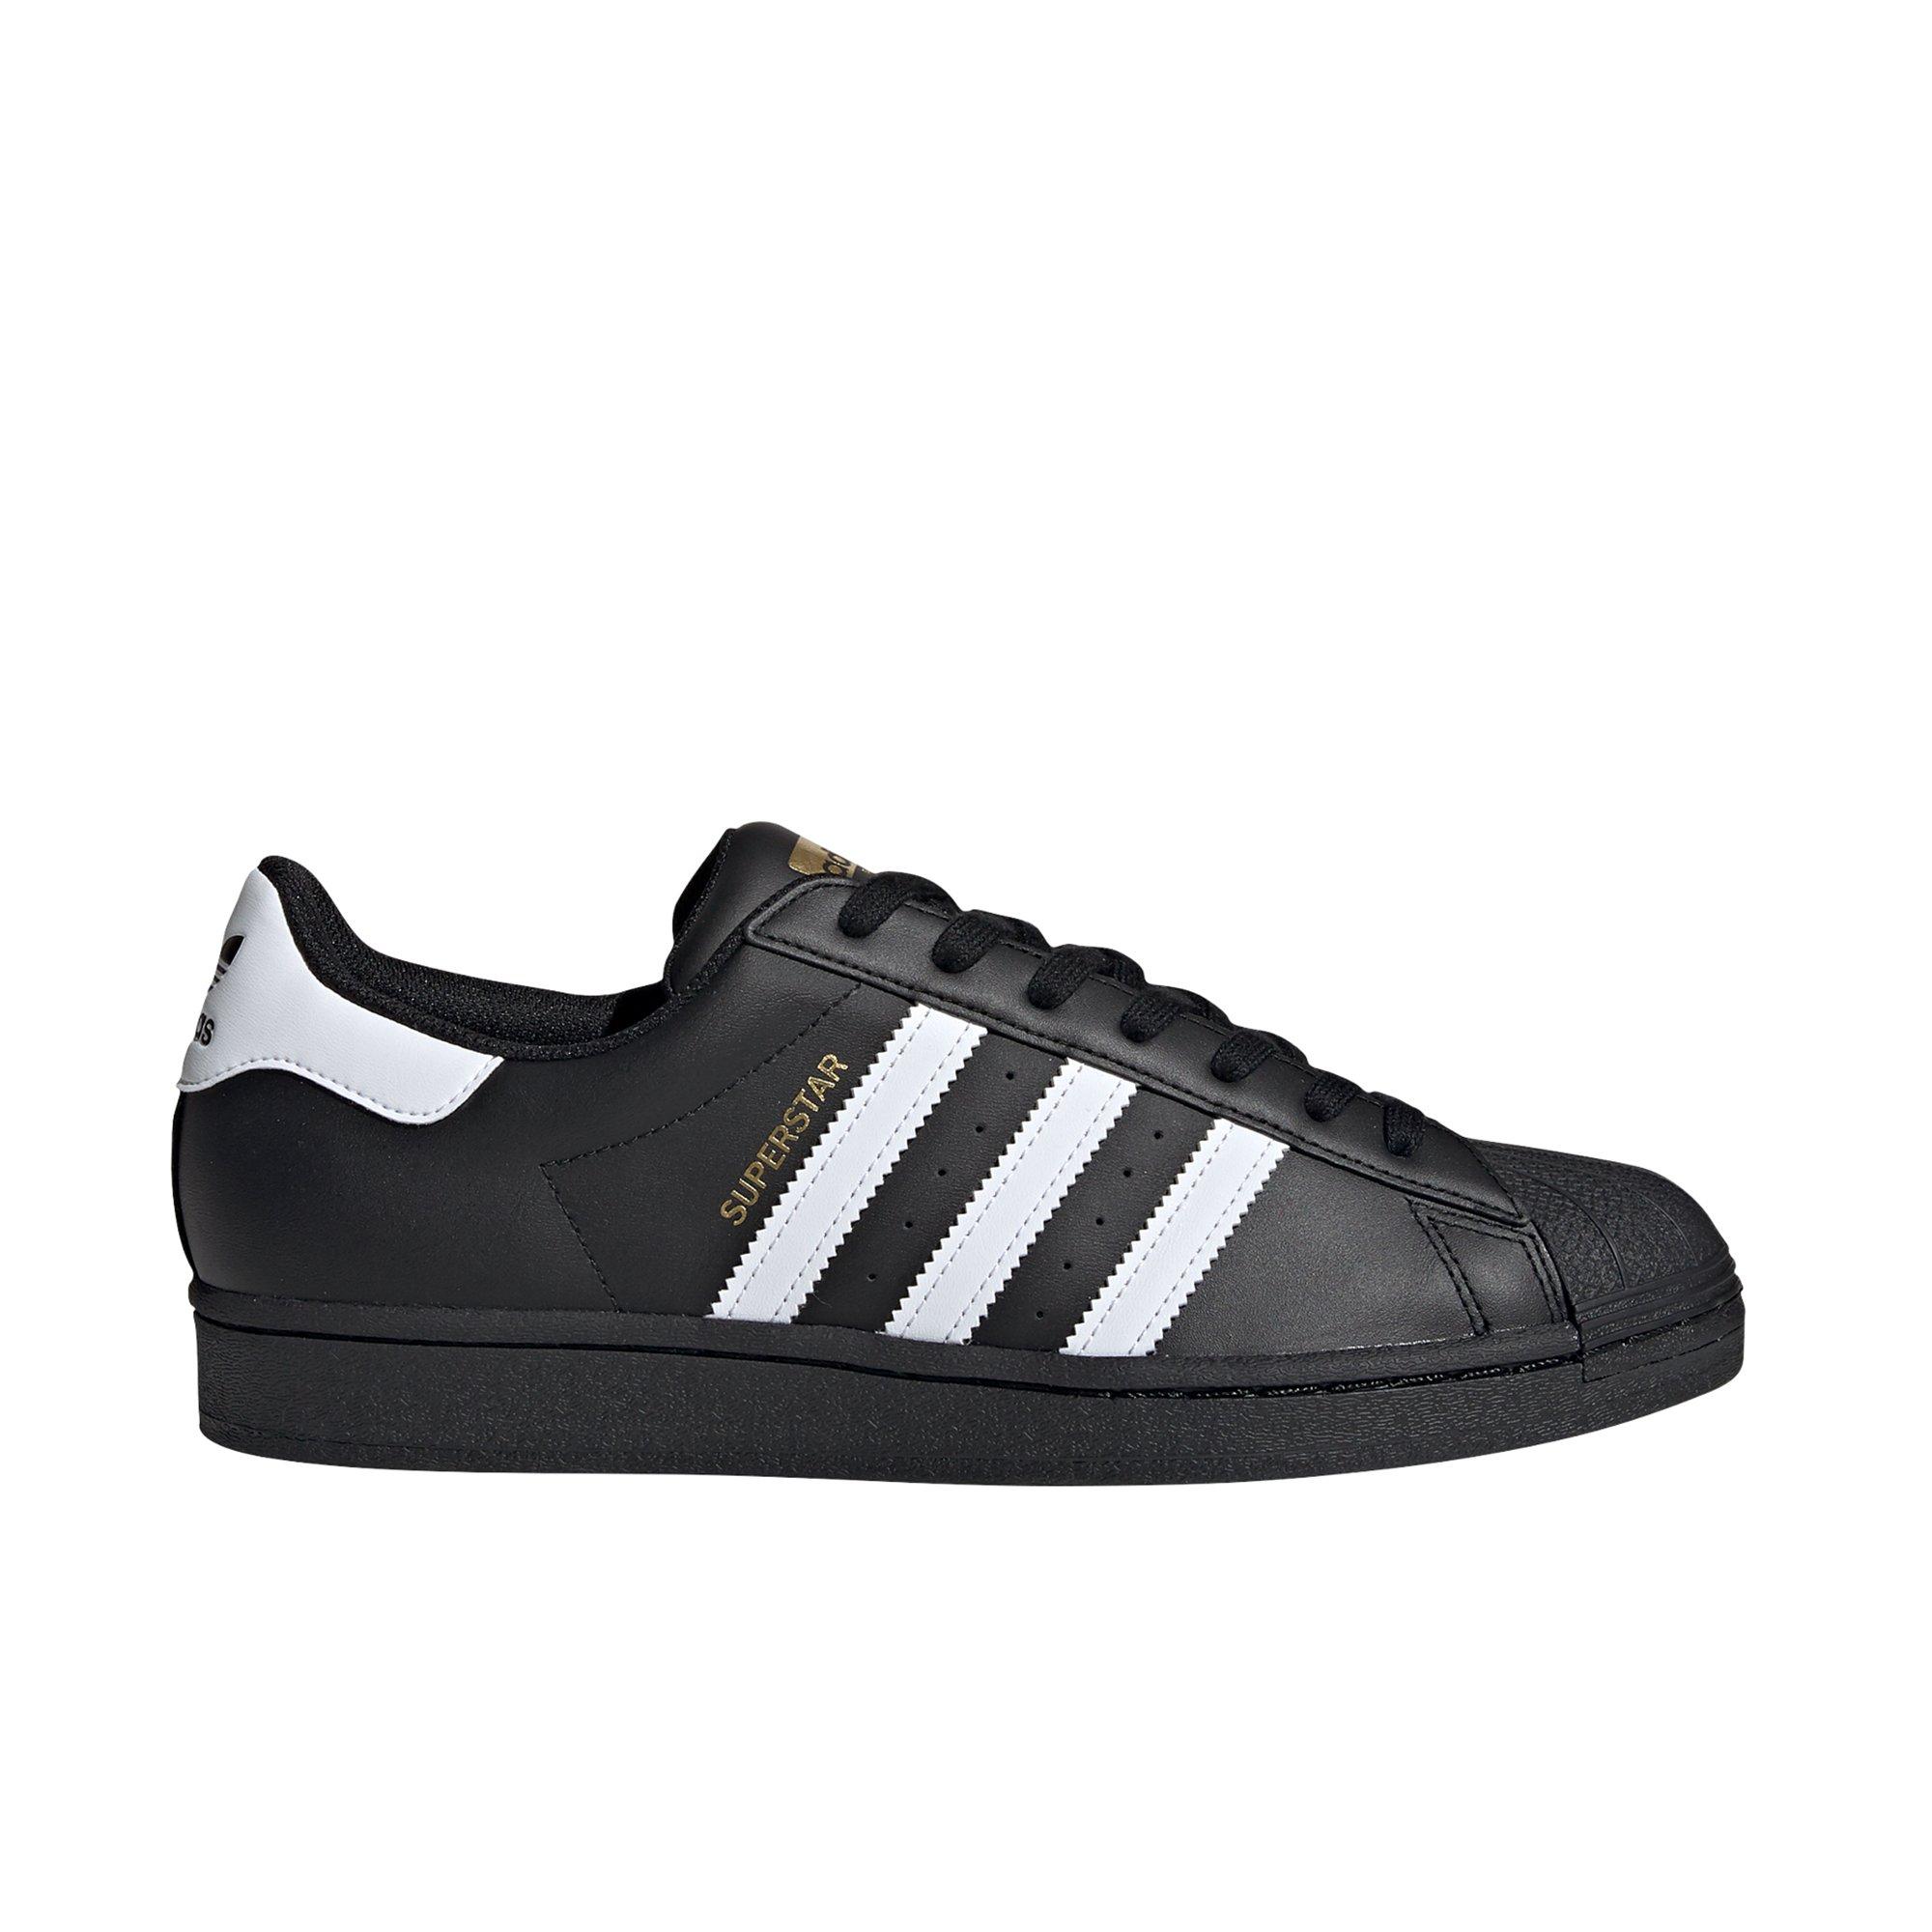 adidas superstar mens white and black